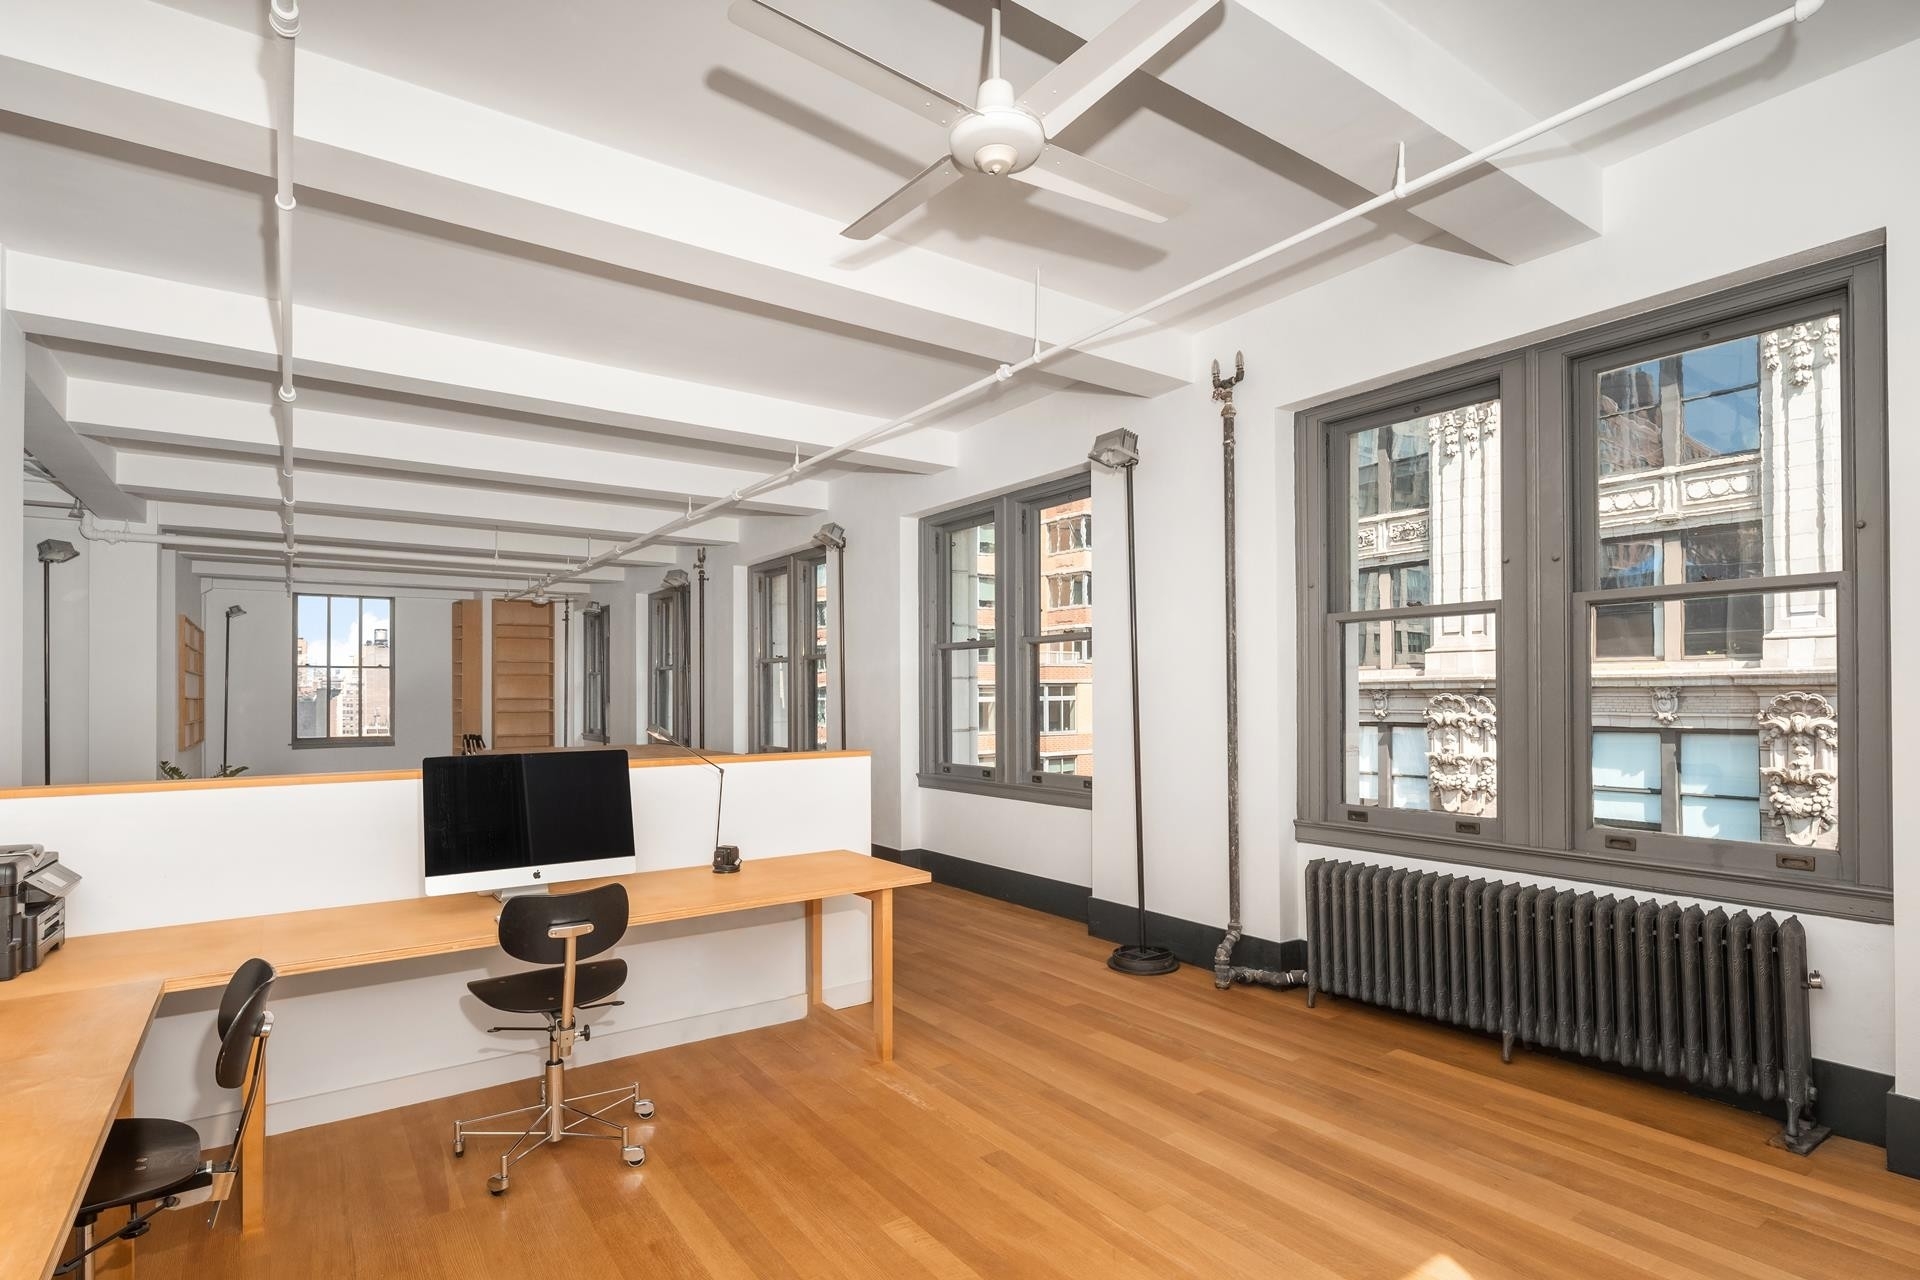 12. Co-op Properties for Sale at 12 Lofts, 38 W 26TH ST, PH12 Flatiron District, New York, NY 10010